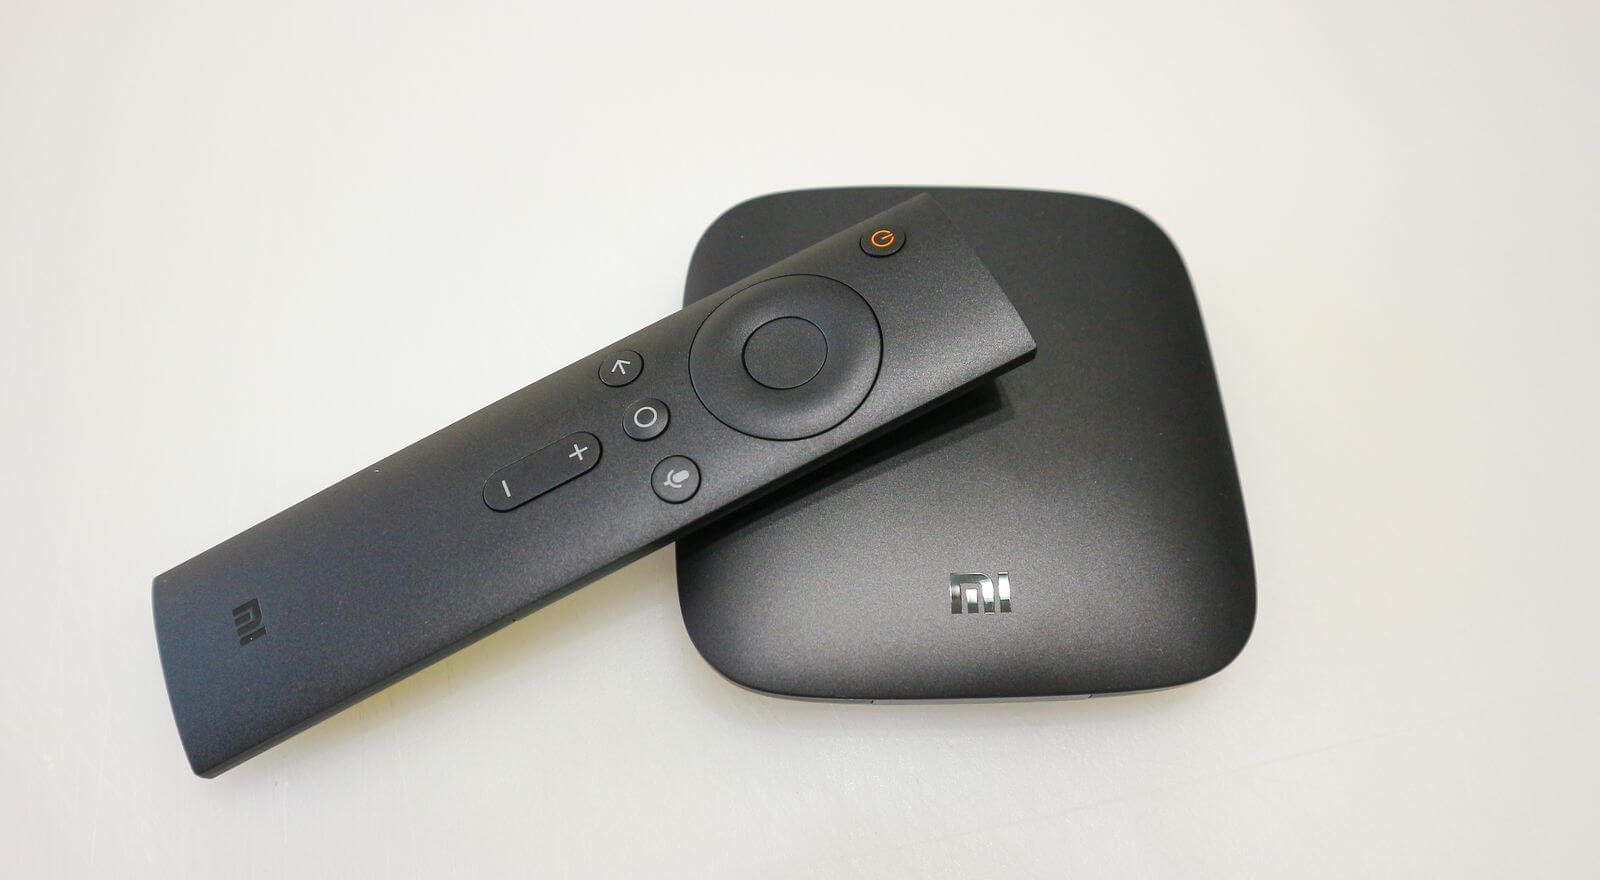 Review Xiaomi Mi Android TV Box: voice control and Android TV 6.0